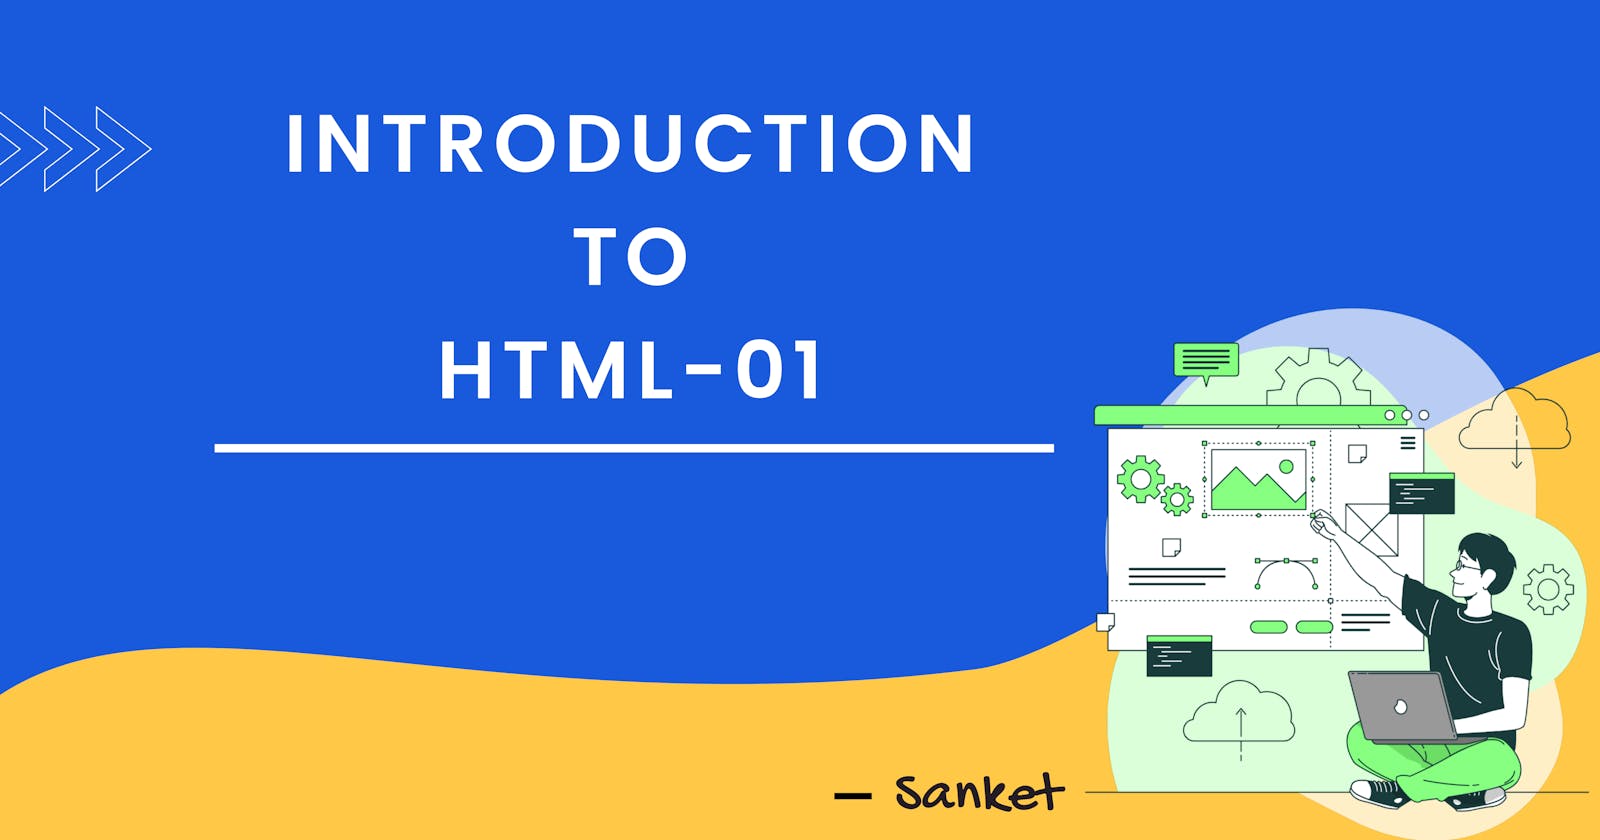 Introduction To HTML - 01